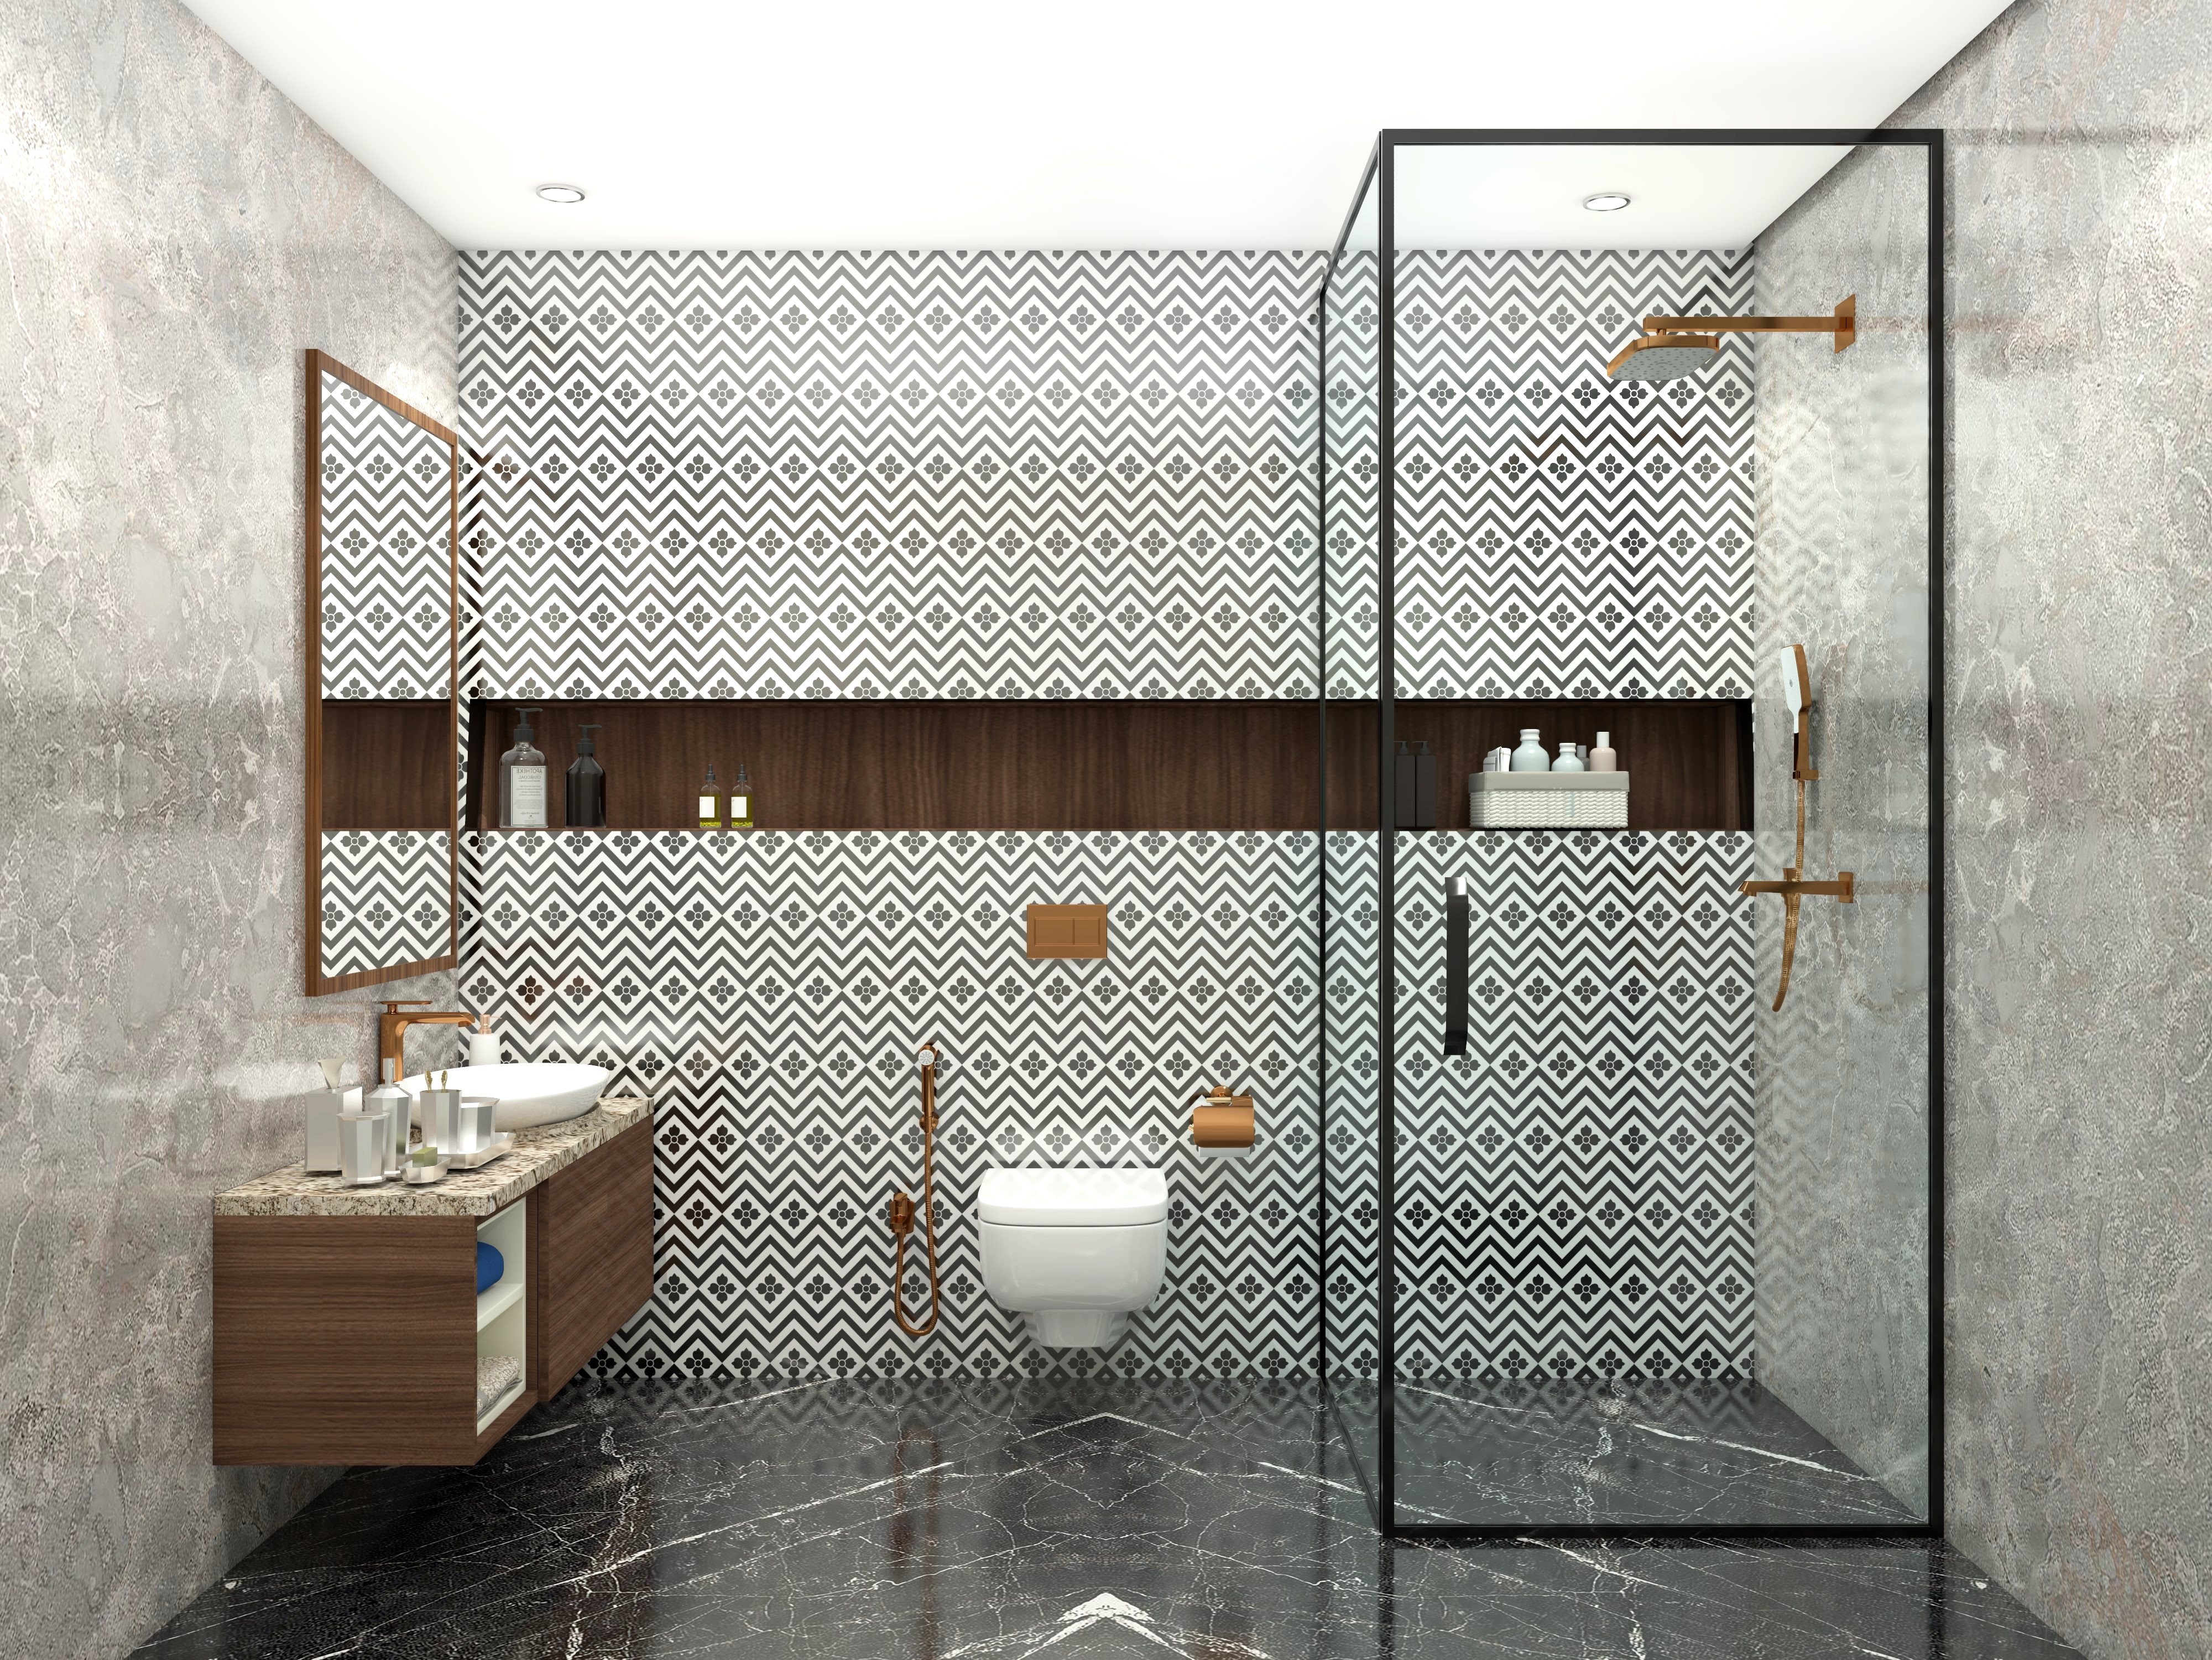 Marble bathroom with printed black and white tiles - Beautiful Homes